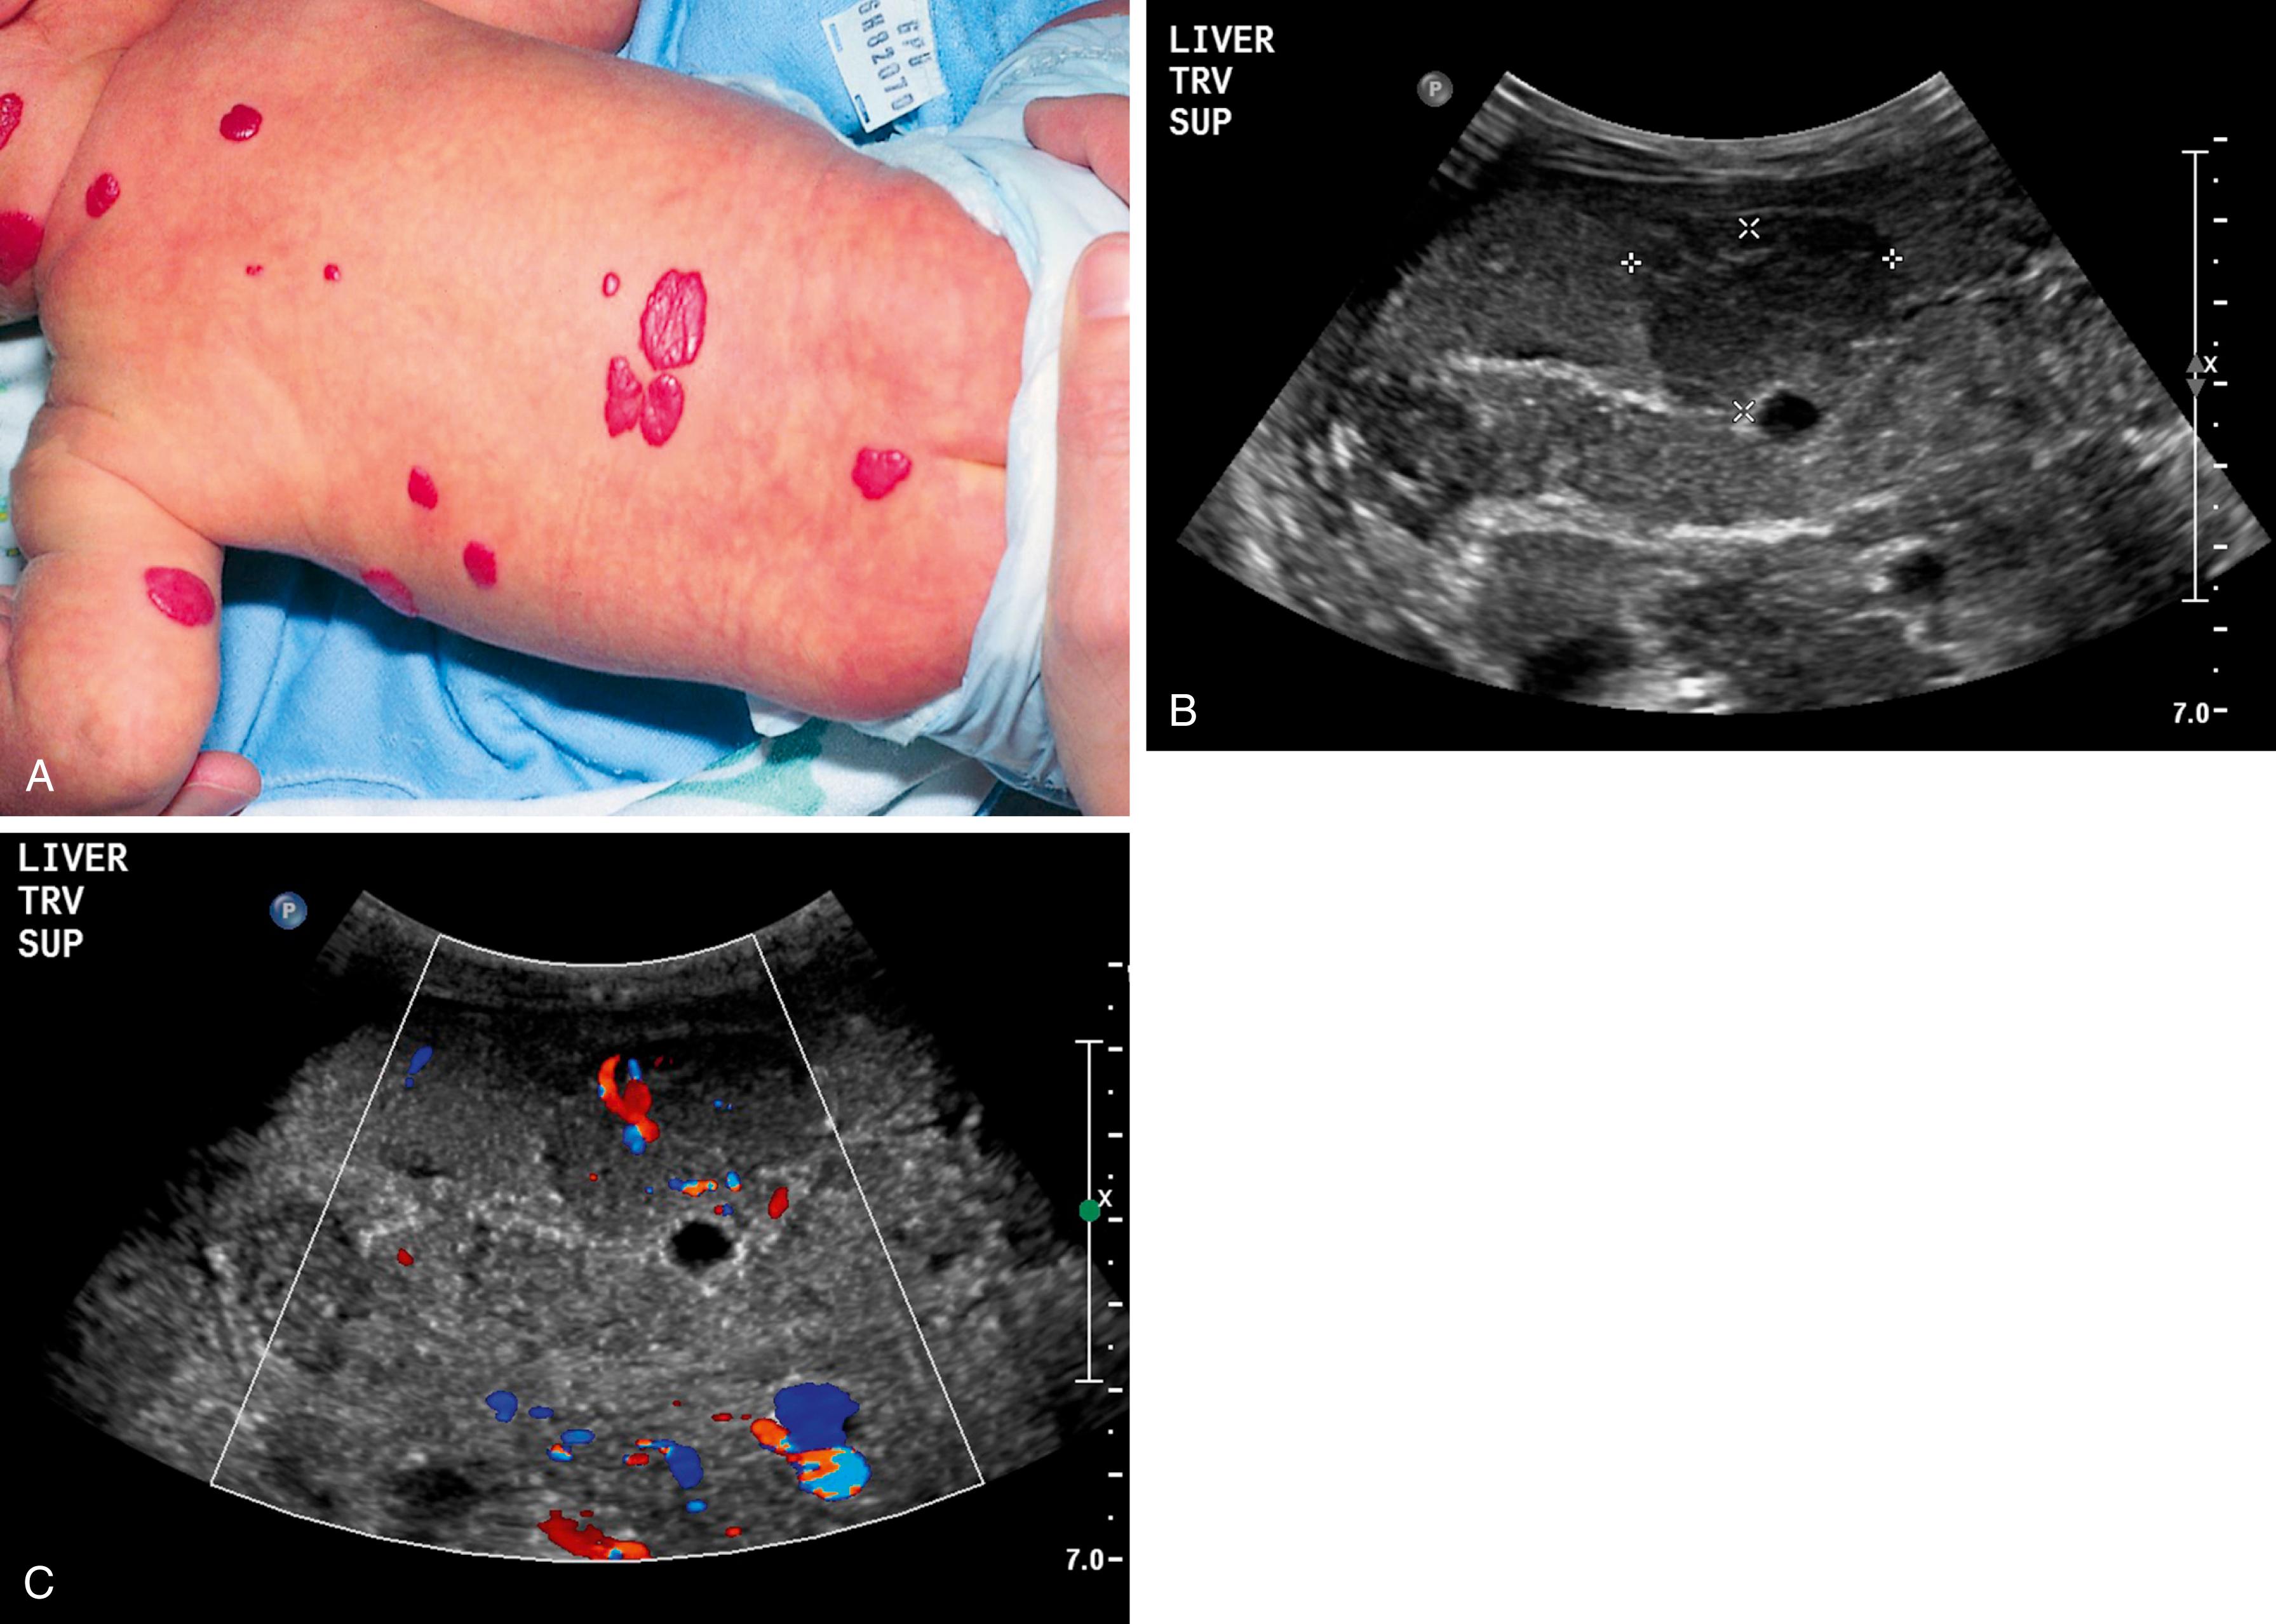 Fig. 10.11, Hemangiomatosis. (A) Multiple soft, red, raised lesions dot the back and arms of this otherwise healthy 1 month old with benign hemangiomatosis. Liver ultrasound demonstrating intrahepatic hemangioma adjacent to the portal vein (B), which on Doppler demonstrates vascular flow (C).